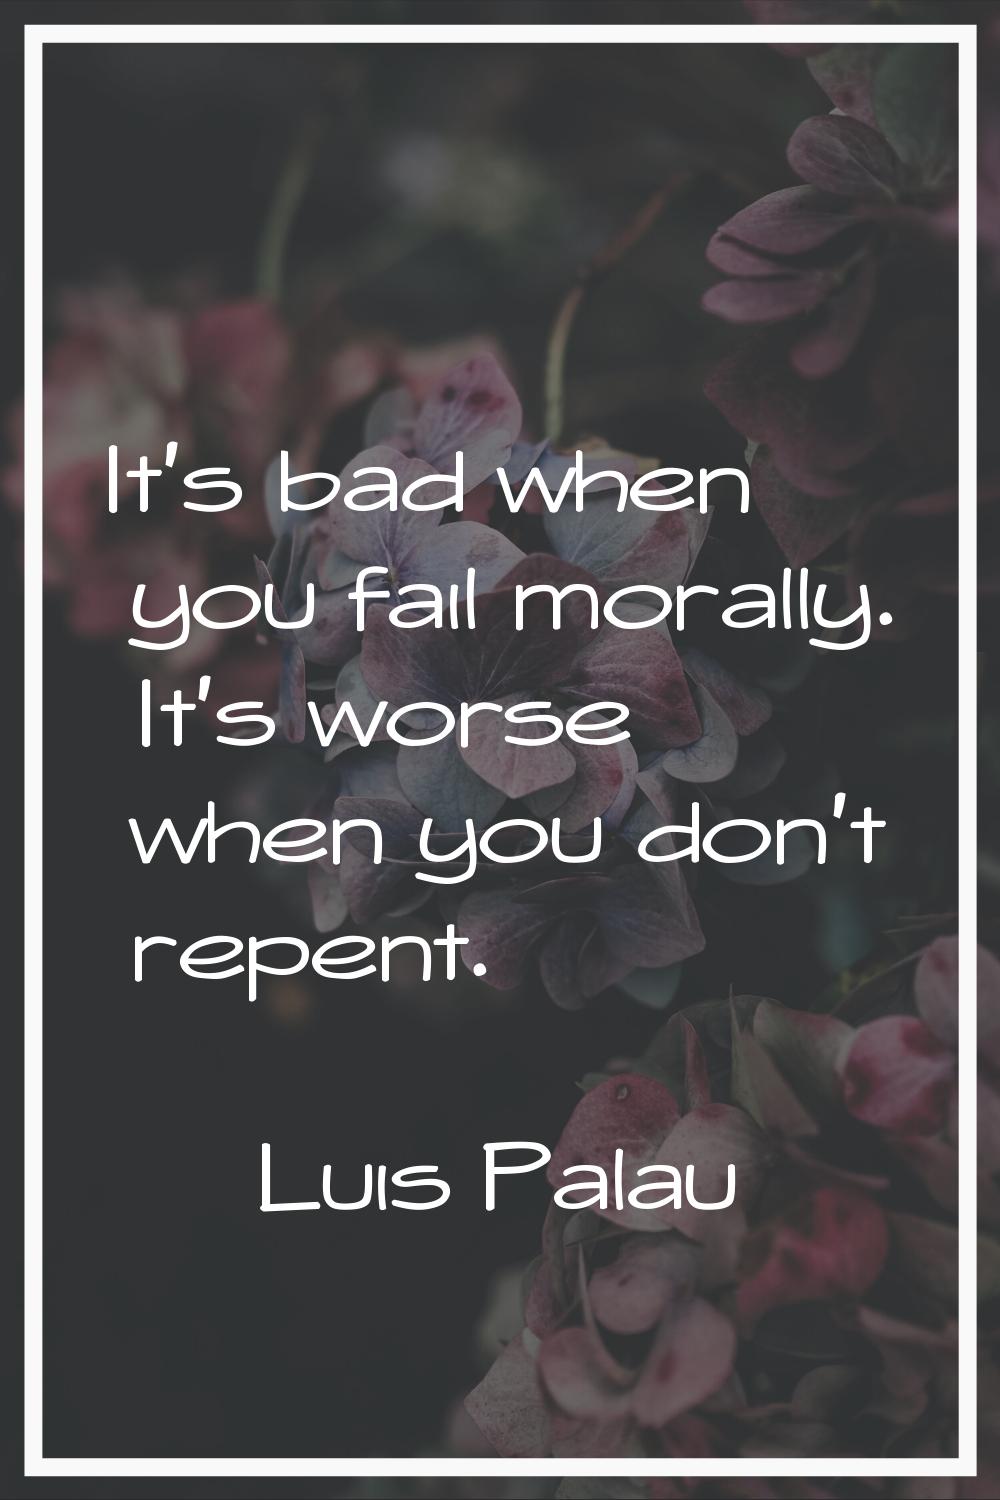 It's bad when you fail morally. It's worse when you don't repent.